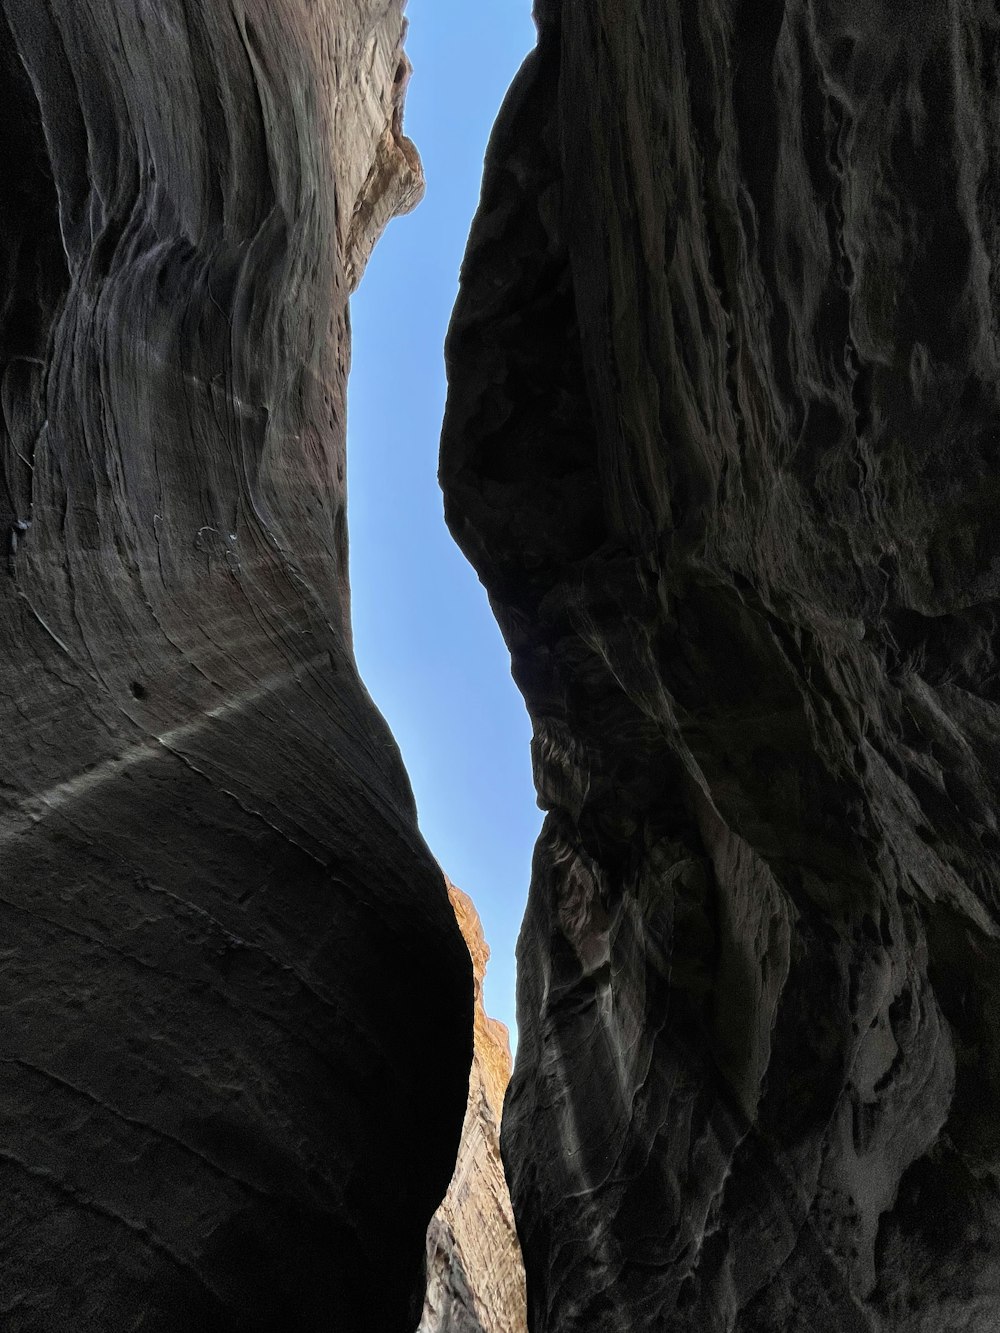 a narrow slot in the side of a mountain